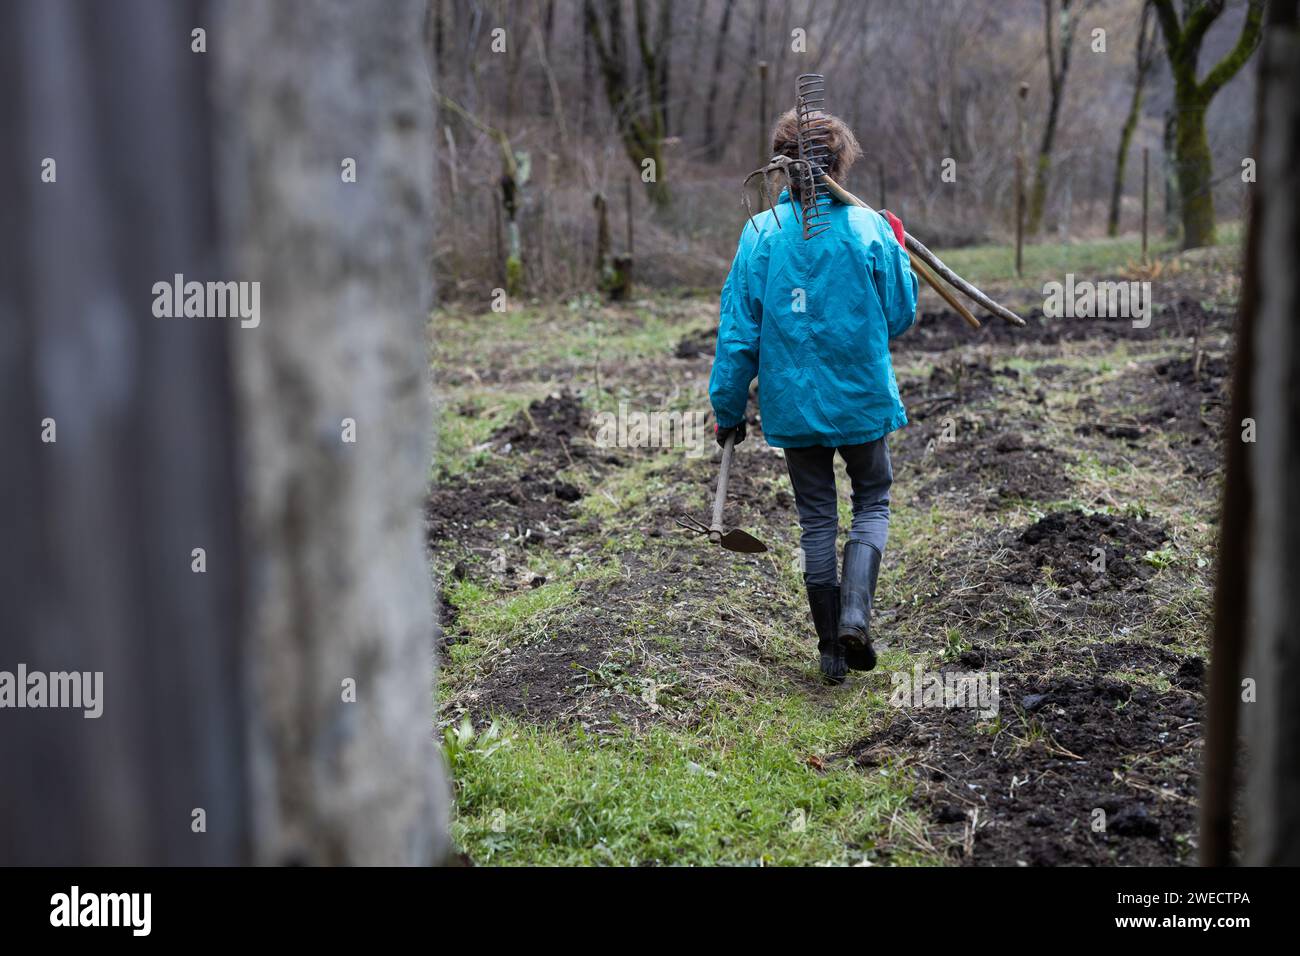 Adult Curly Hair Woman Farmer in Blue Cloths and A Rake in Hands Going on Her Garden in Winter to do Some Work Stock Photo